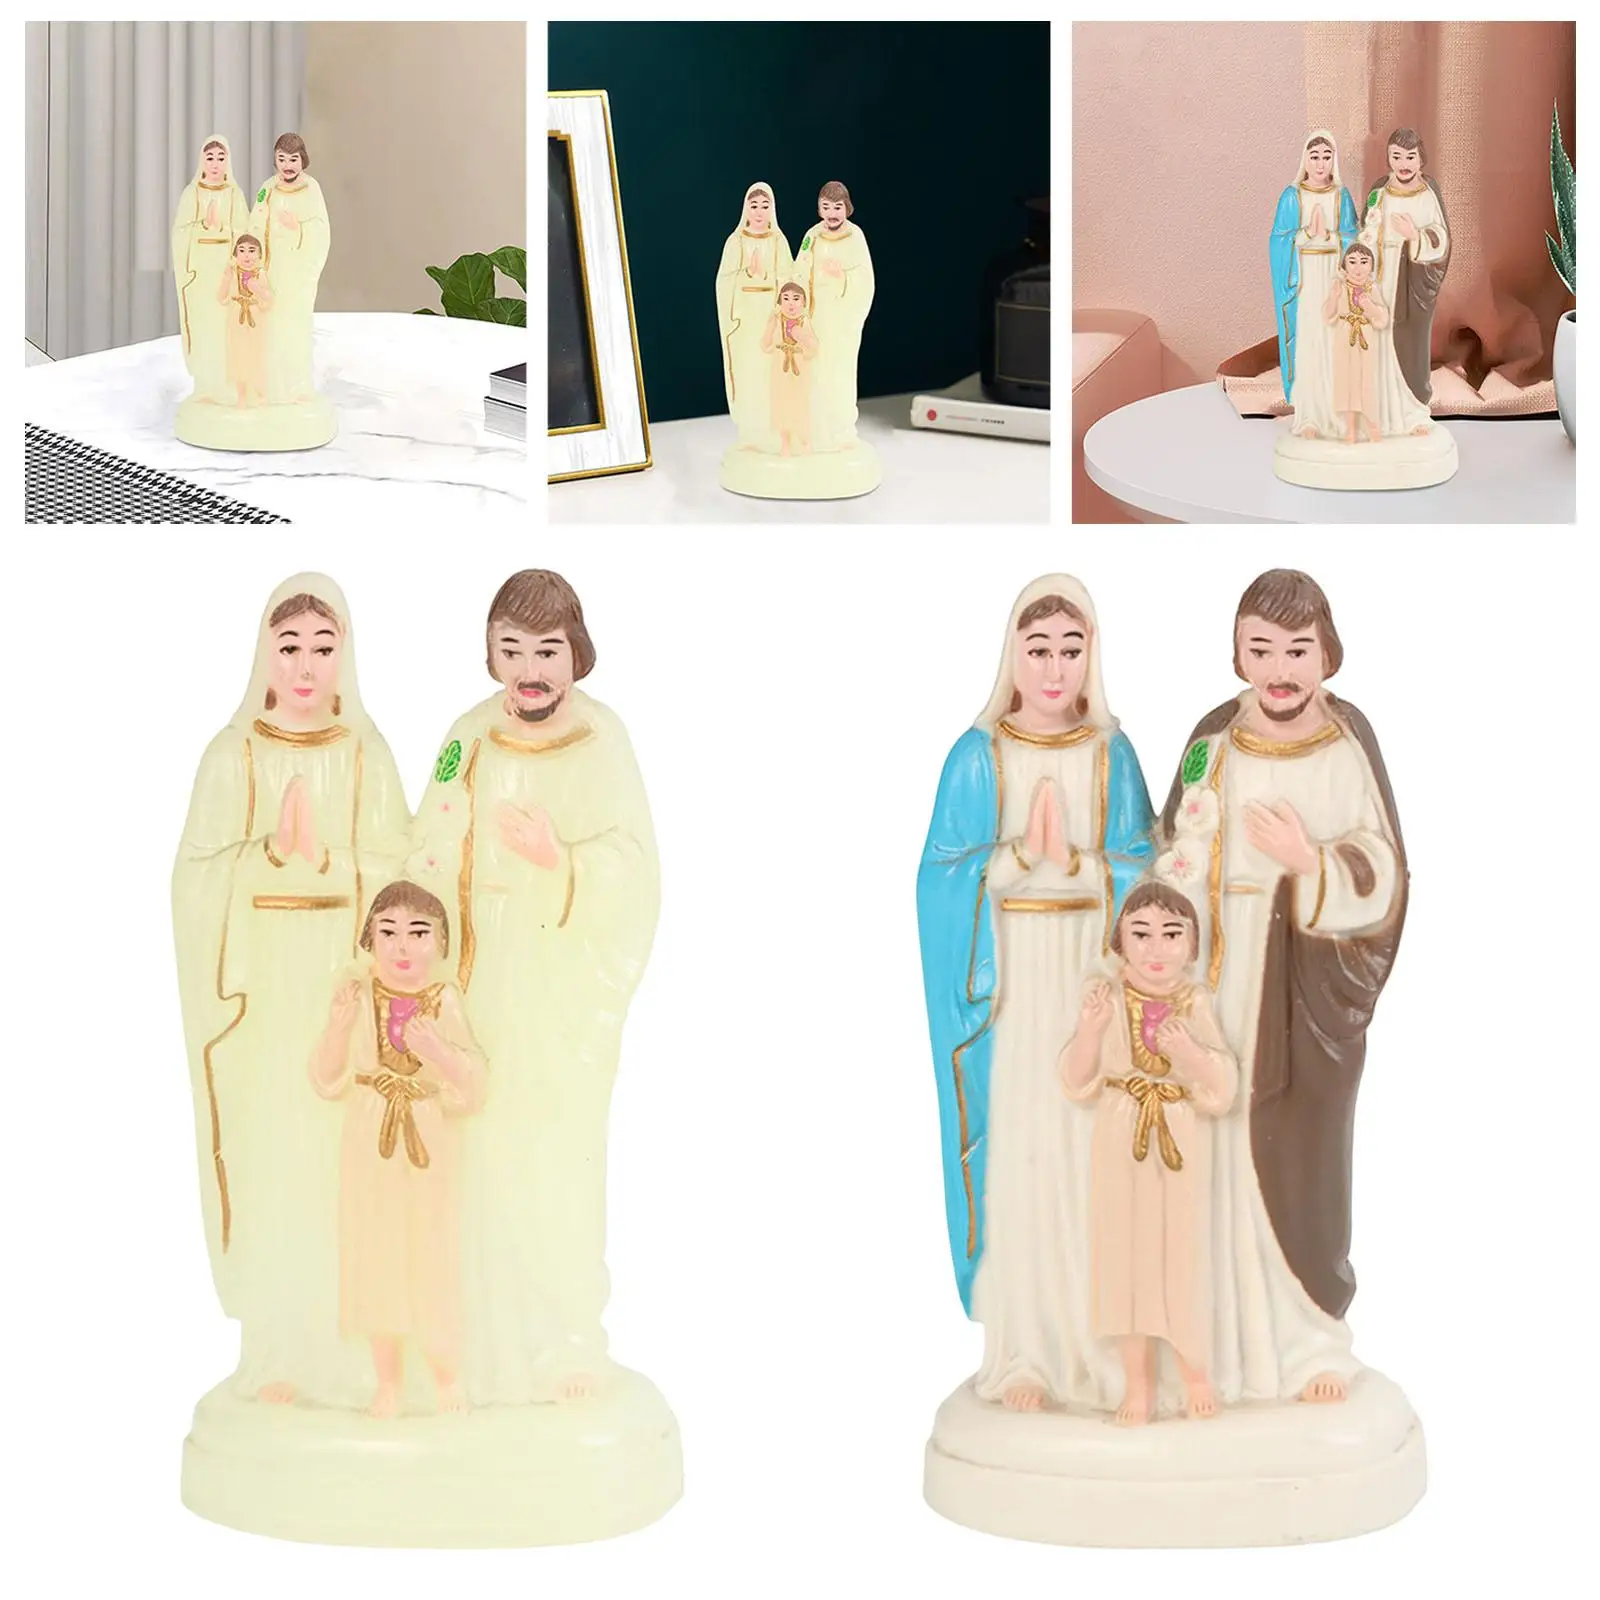 Holy Family with Child Statue Religious Figurine Christian Catholic Ornament for Desktop